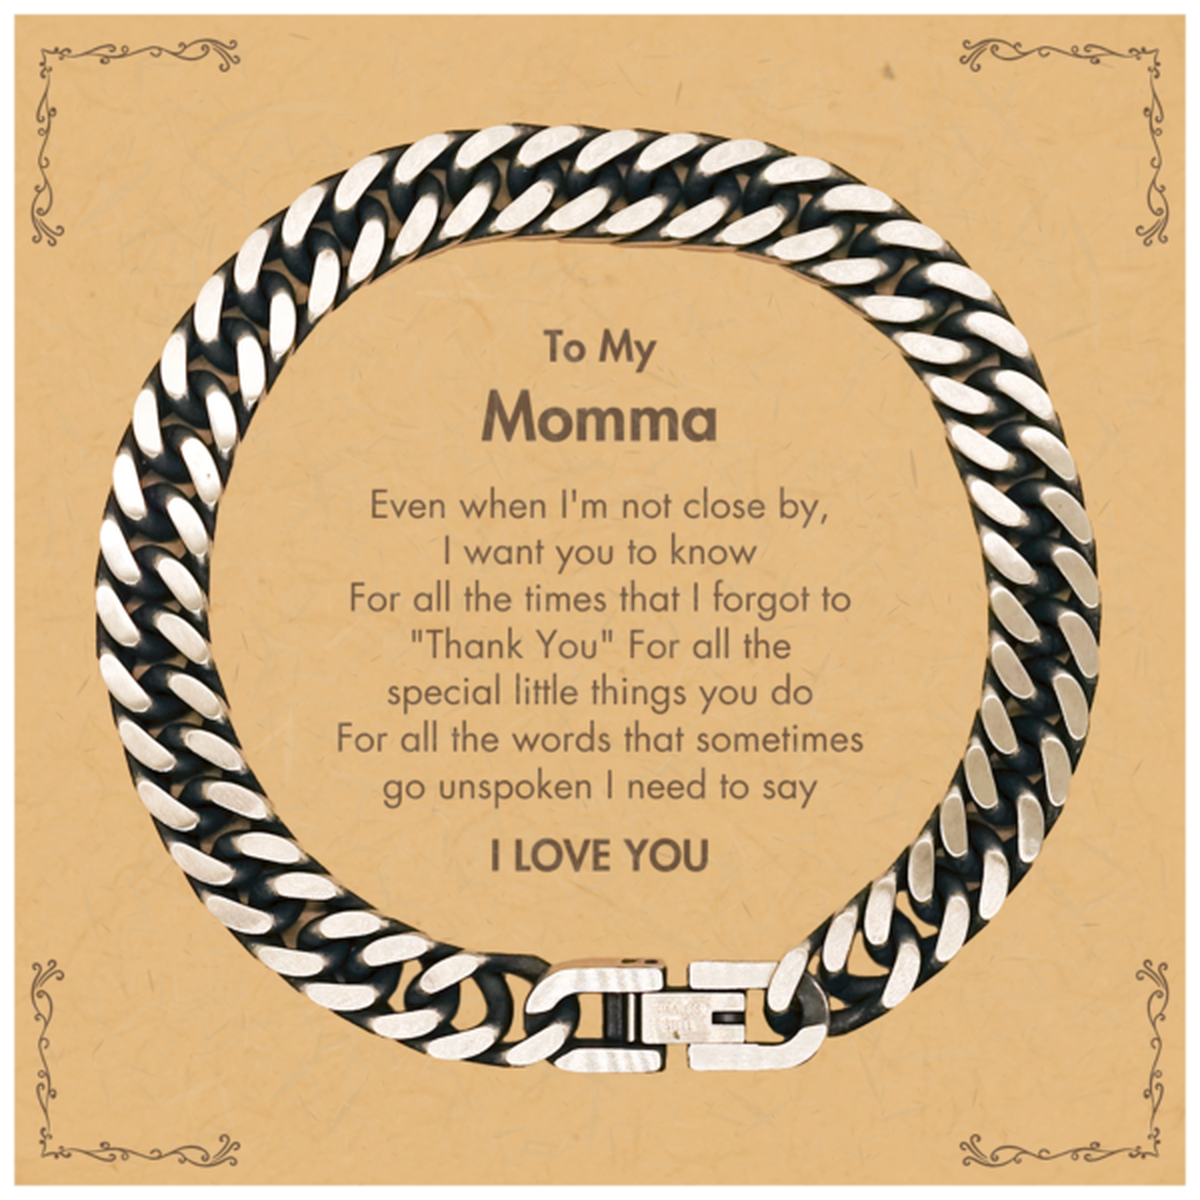 Thank You Gifts for Momma, Keepsake Cuban Link Chain Bracelet Gifts for Momma Birthday Mother's day Father's Day Momma For all the words That sometimes go unspoken I need to say I LOVE YOU